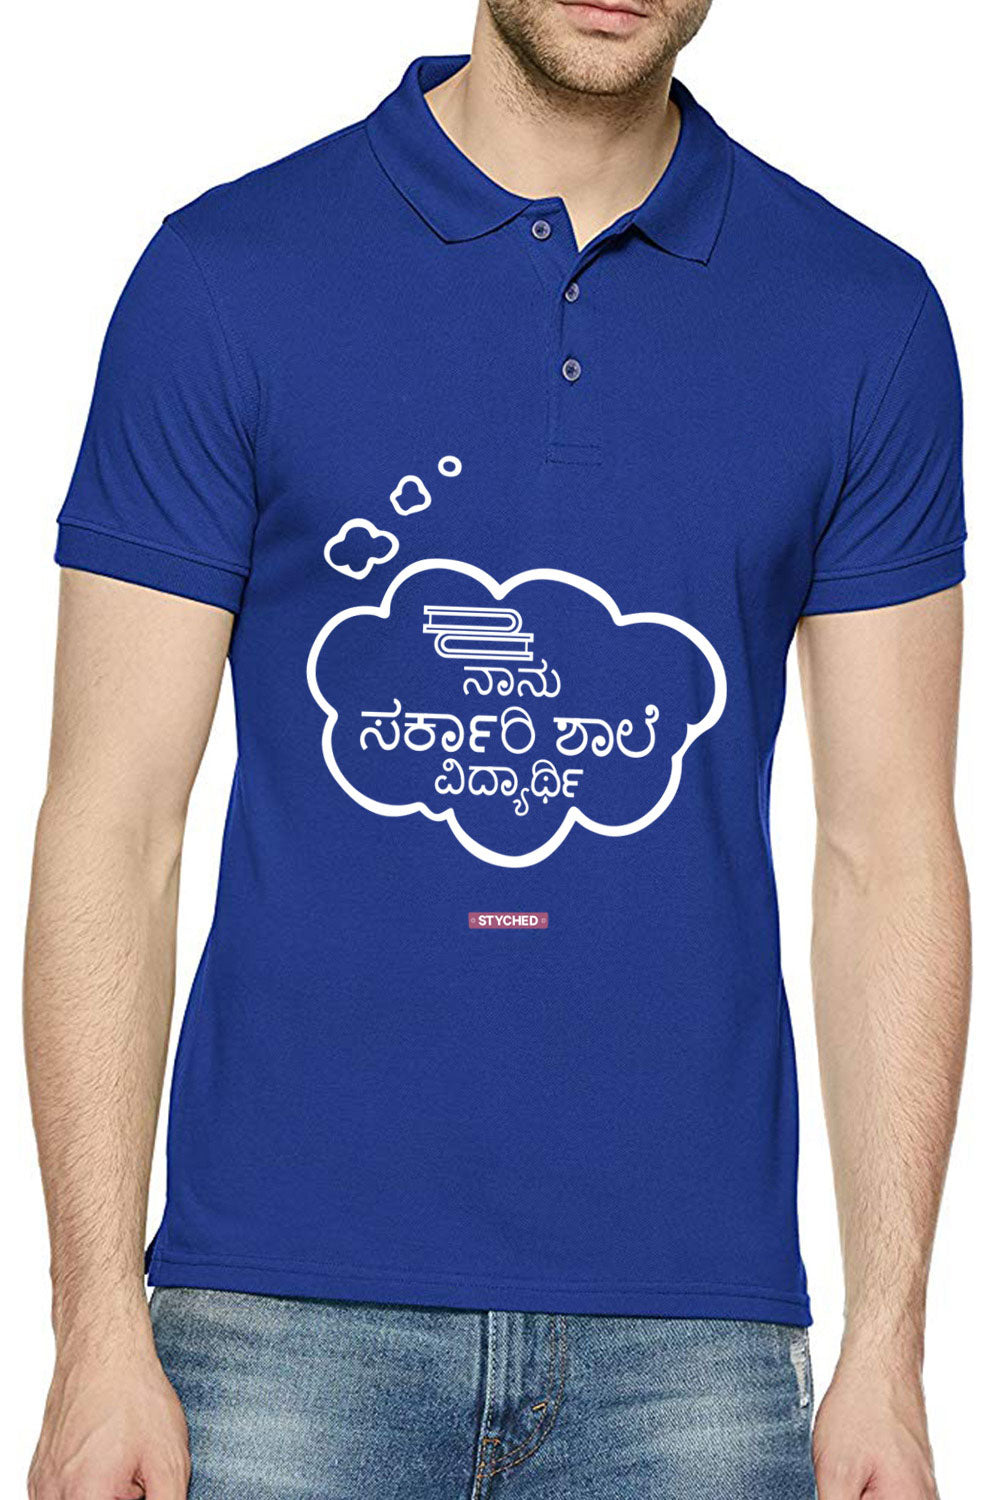 Save Govt. Schools Movement Tee - Styched in India Graphic Polo T-Shirt Blue Color